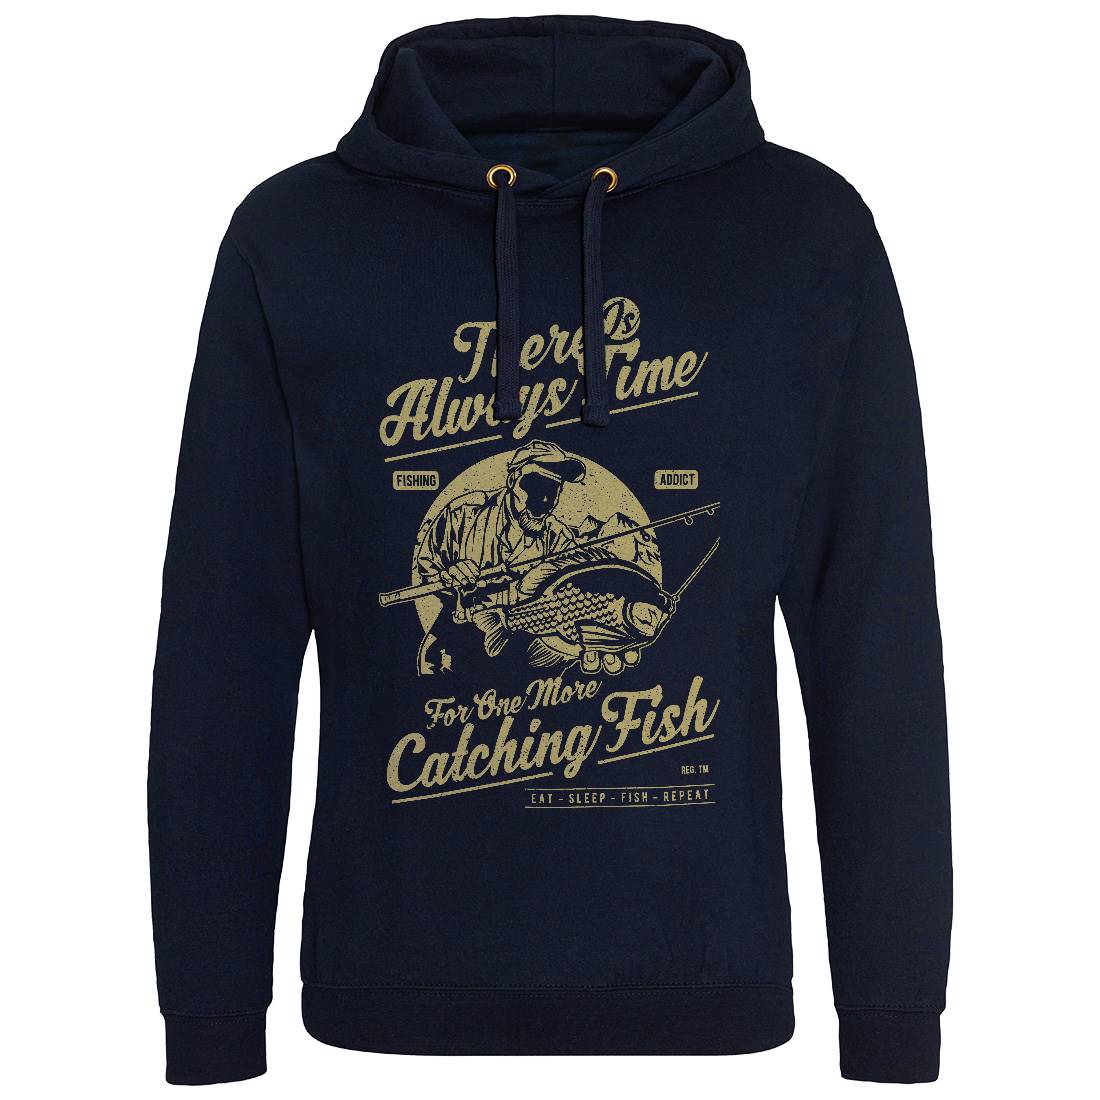 One More Catching Mens Hoodie Without Pocket Fishing A731